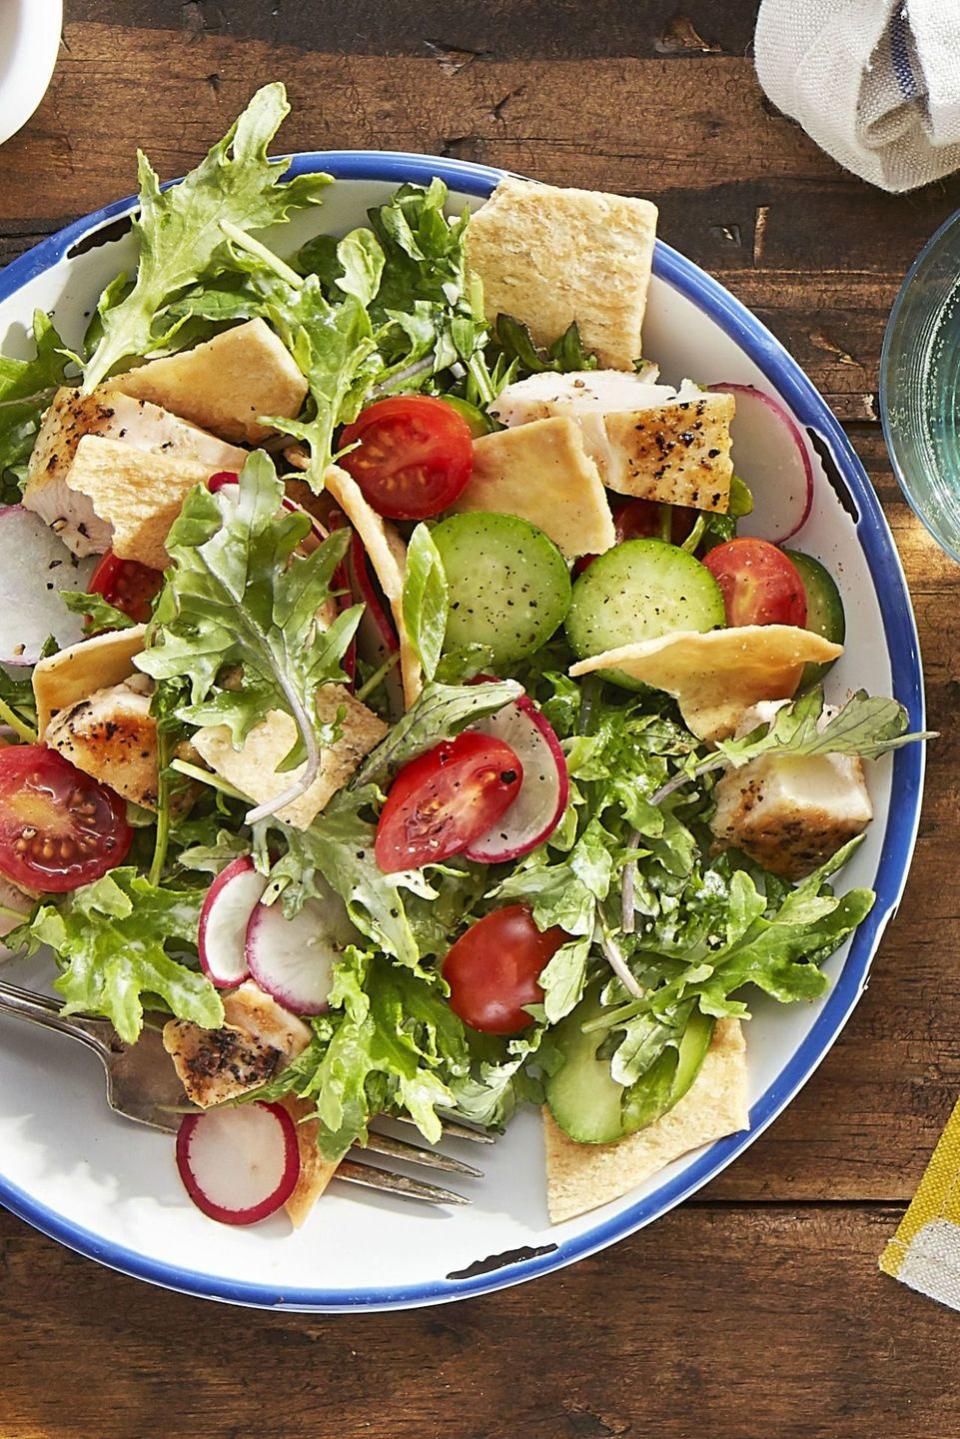 <p>Cucumbers and radishes bring crunch <em>and </em>color to this baby kale salad.</p><p><strong><a href="https://www.countryliving.com/food-drinks/recipes/a44243/kale-chicken-pita-salad-recipe/" rel="nofollow noopener" target="_blank" data-ylk="slk:Get the recipe for Chicken Pita Salad" class="link ">Get the recipe for Chicken Pita Salad</a>.</strong></p>